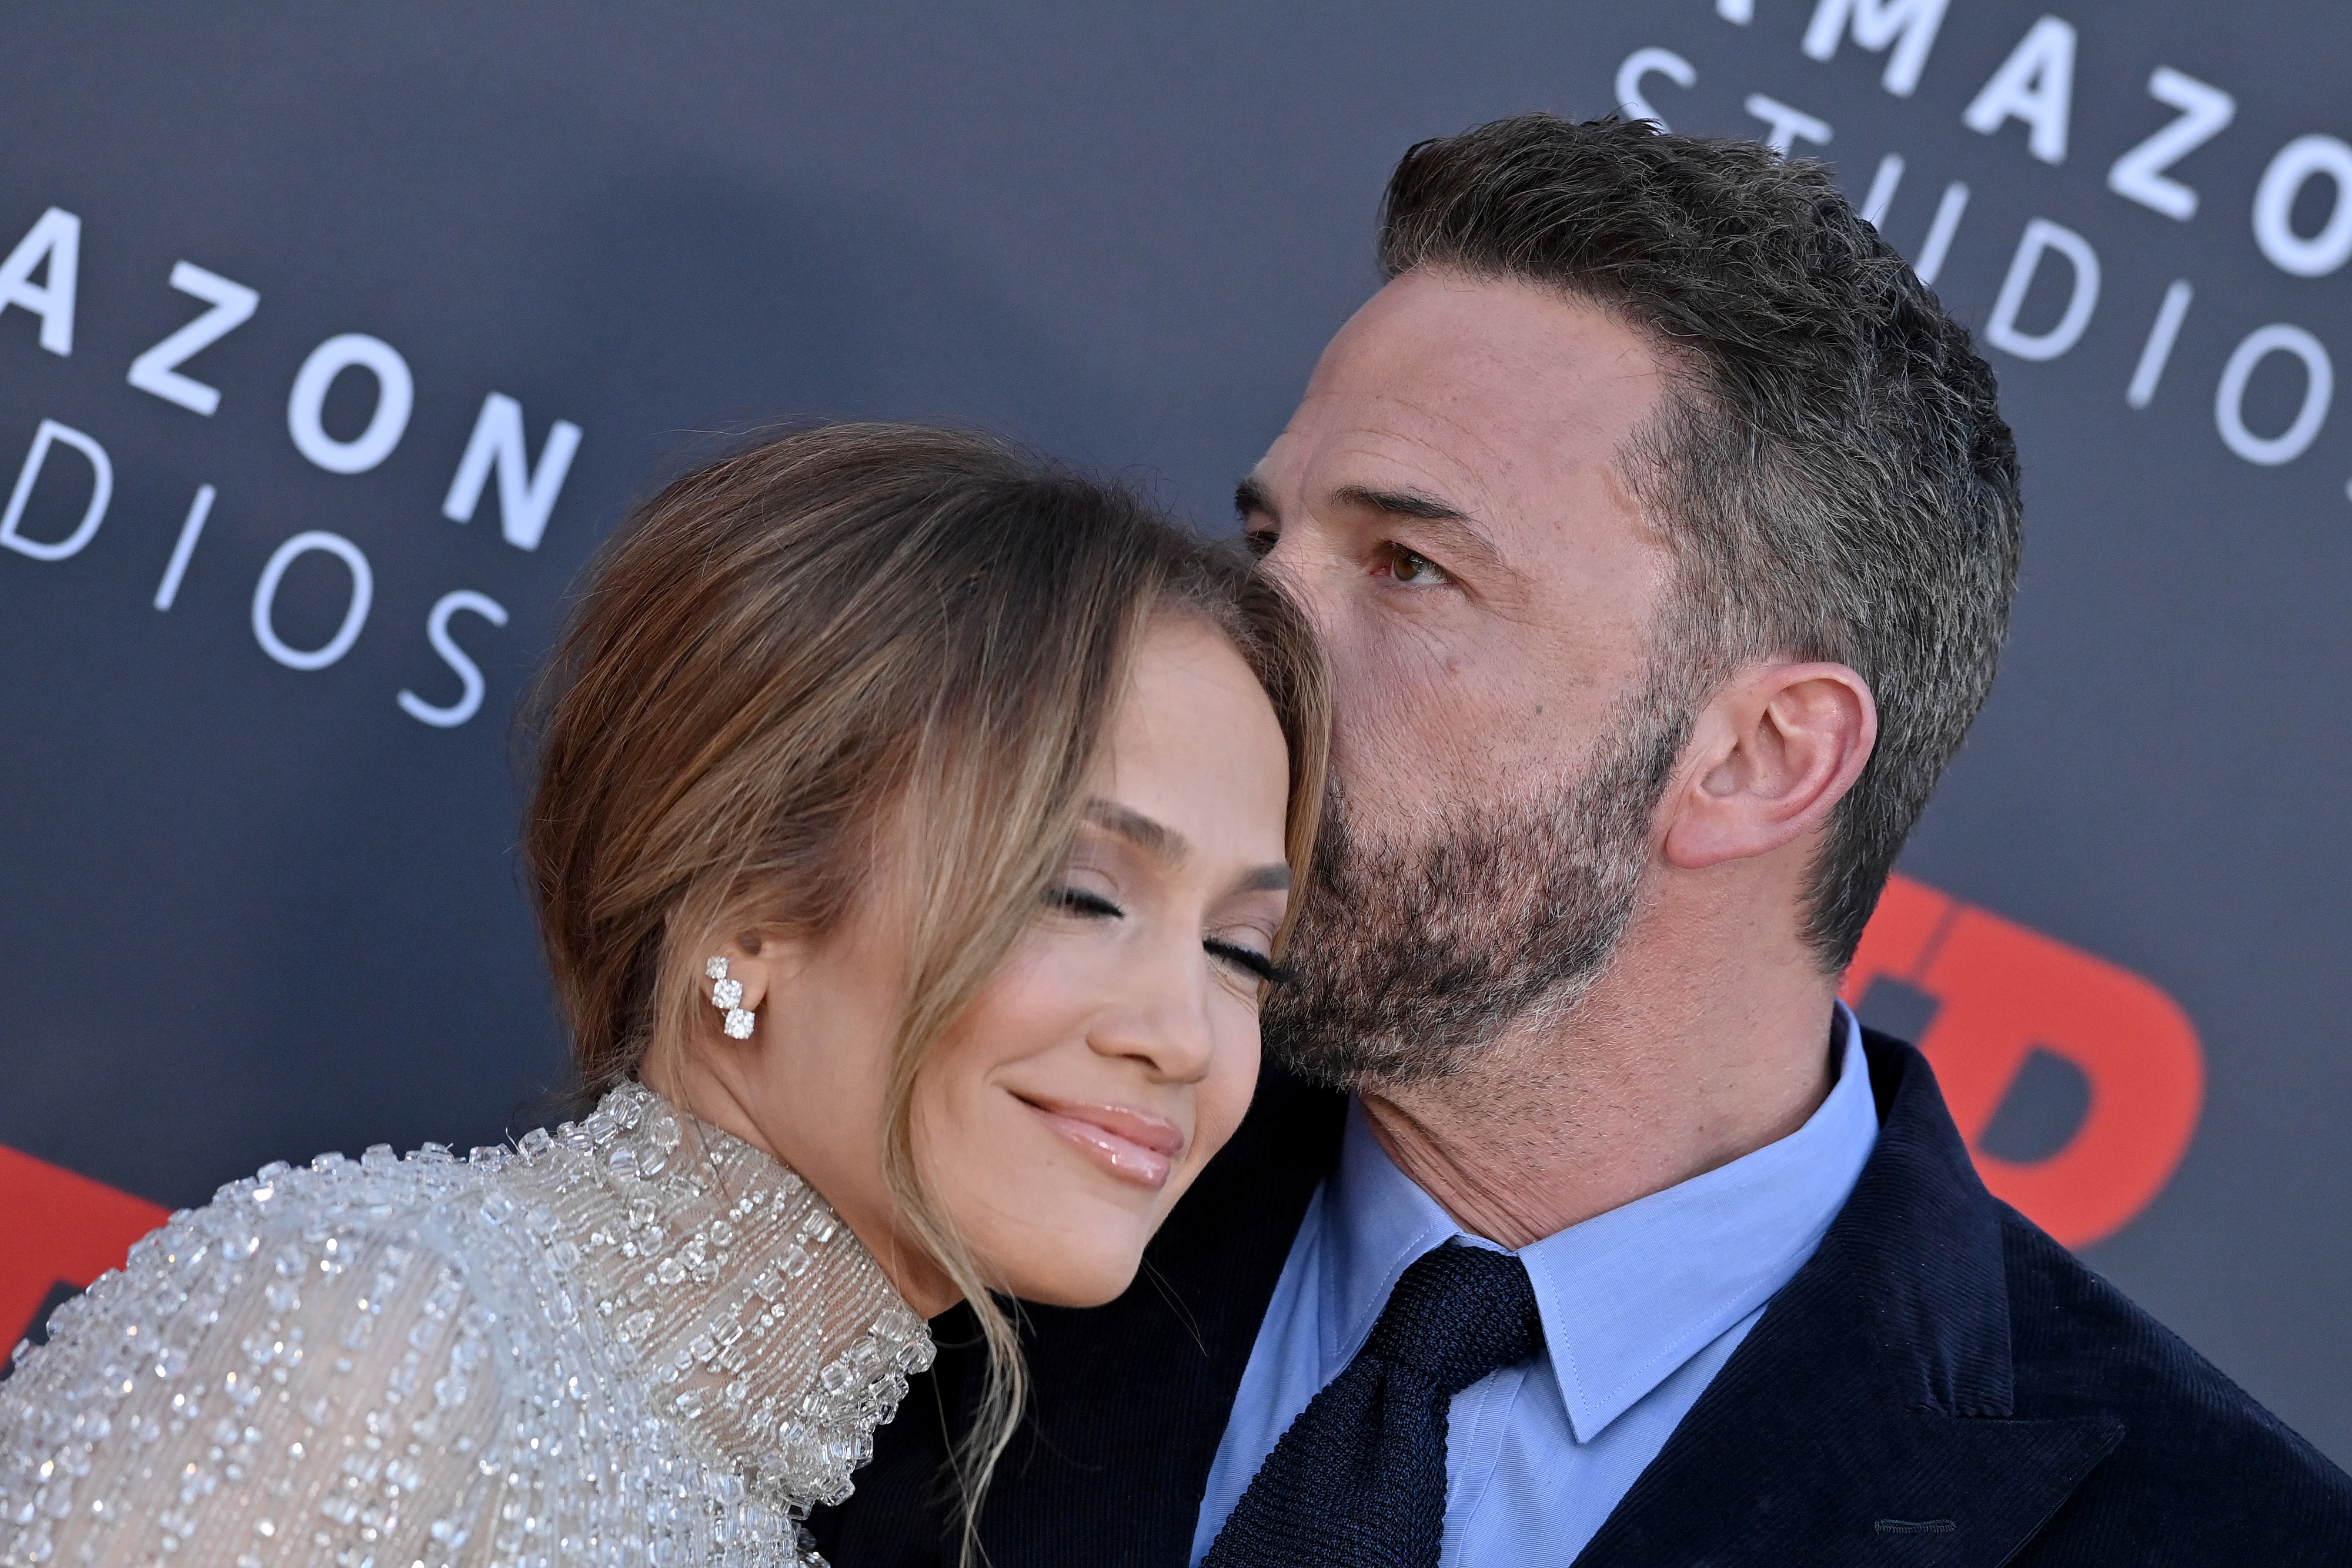 Close-up of JLo smiling and Ben kissing her hair  at a media event